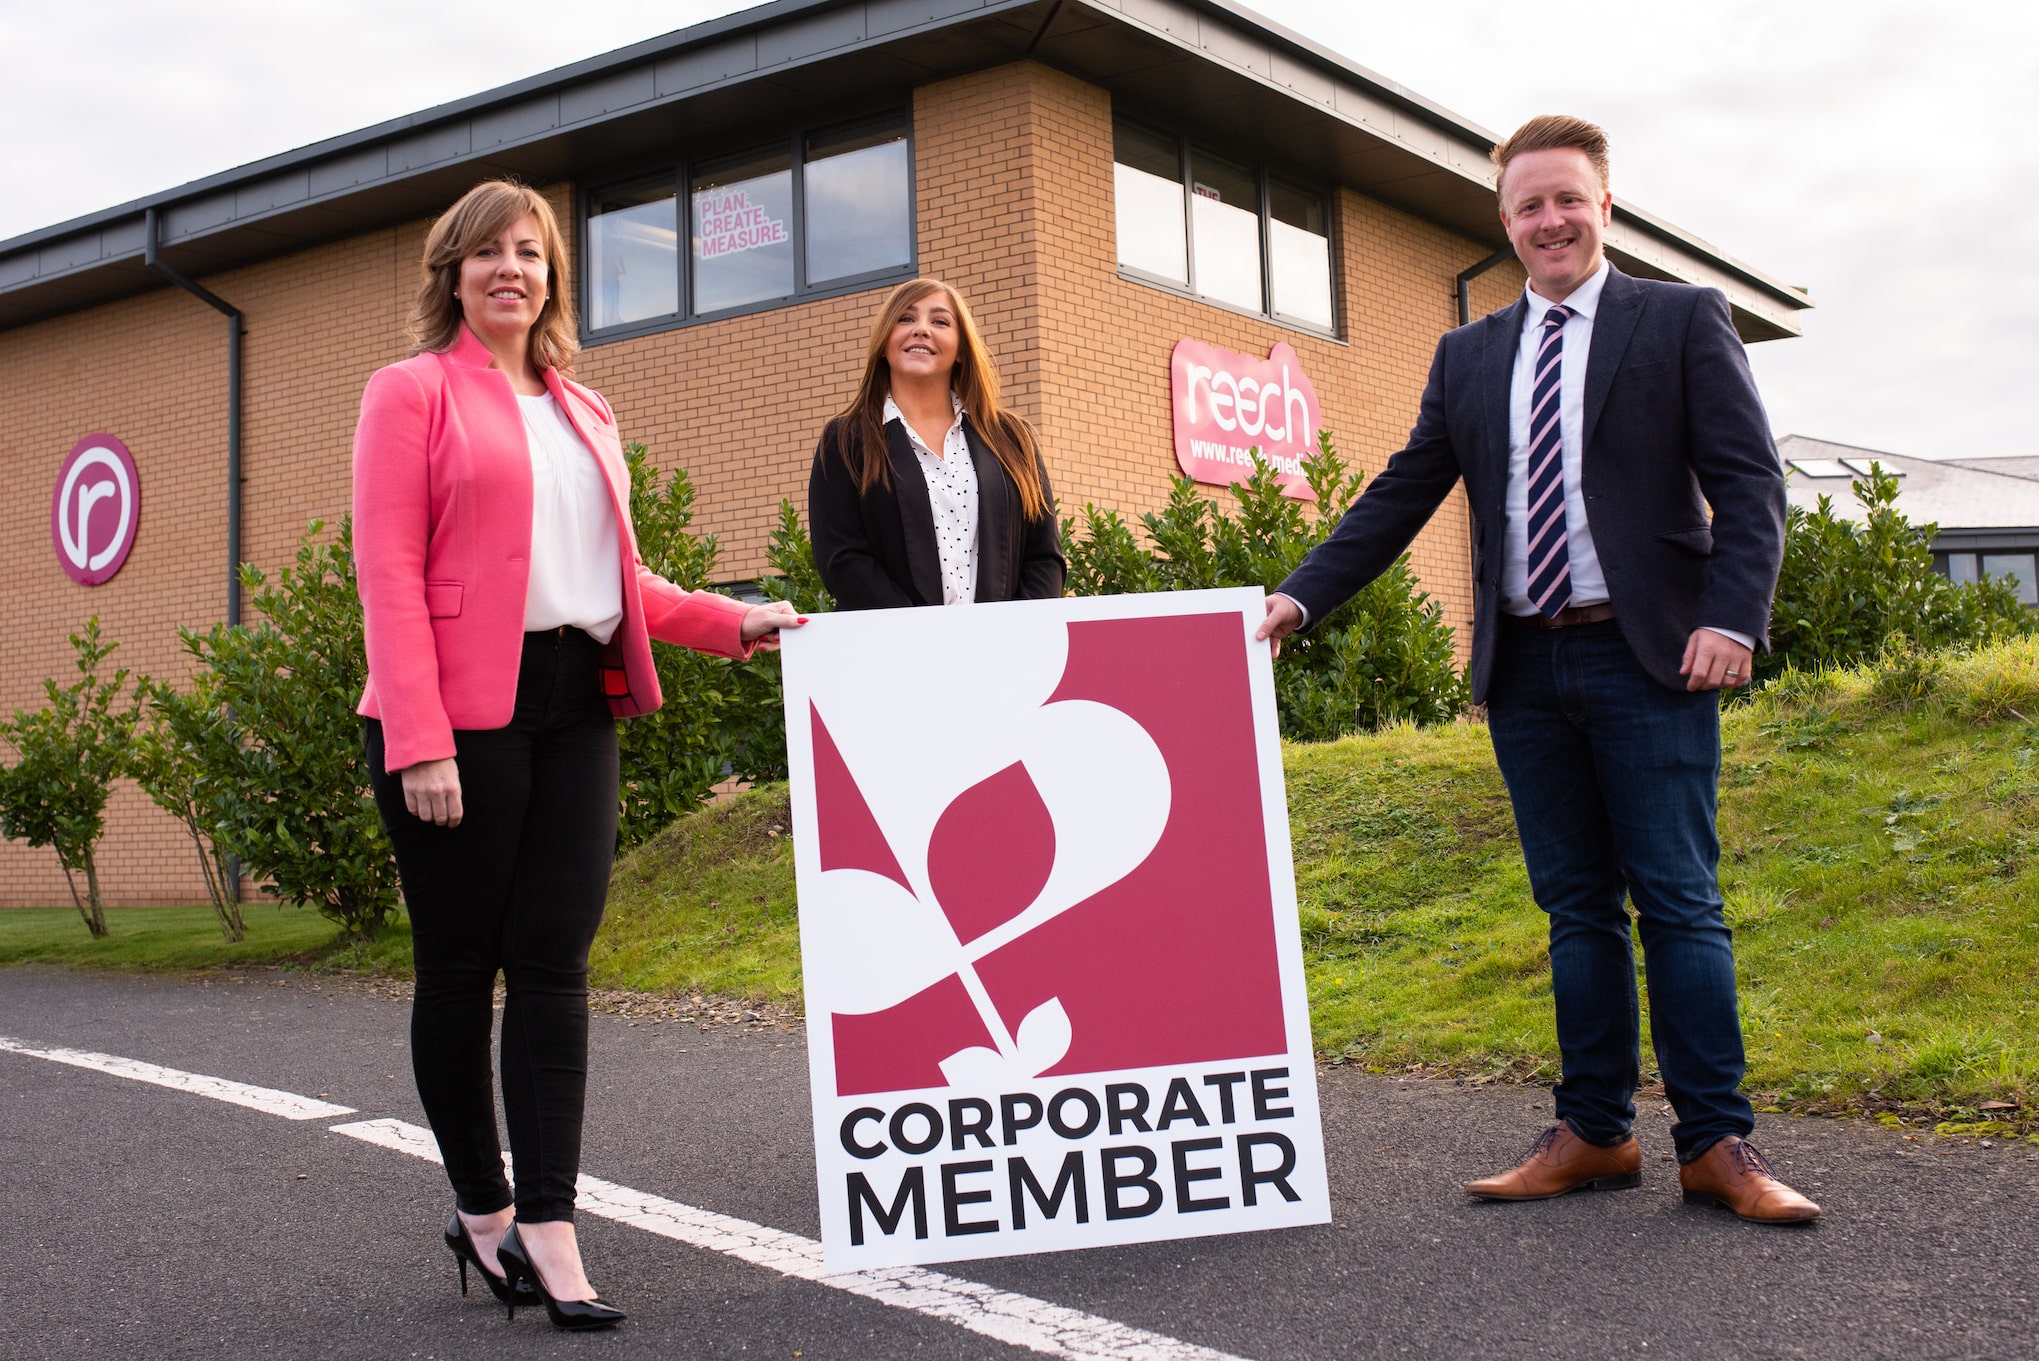 We’re Corporate Members of Shropshire Chamber of Commerce